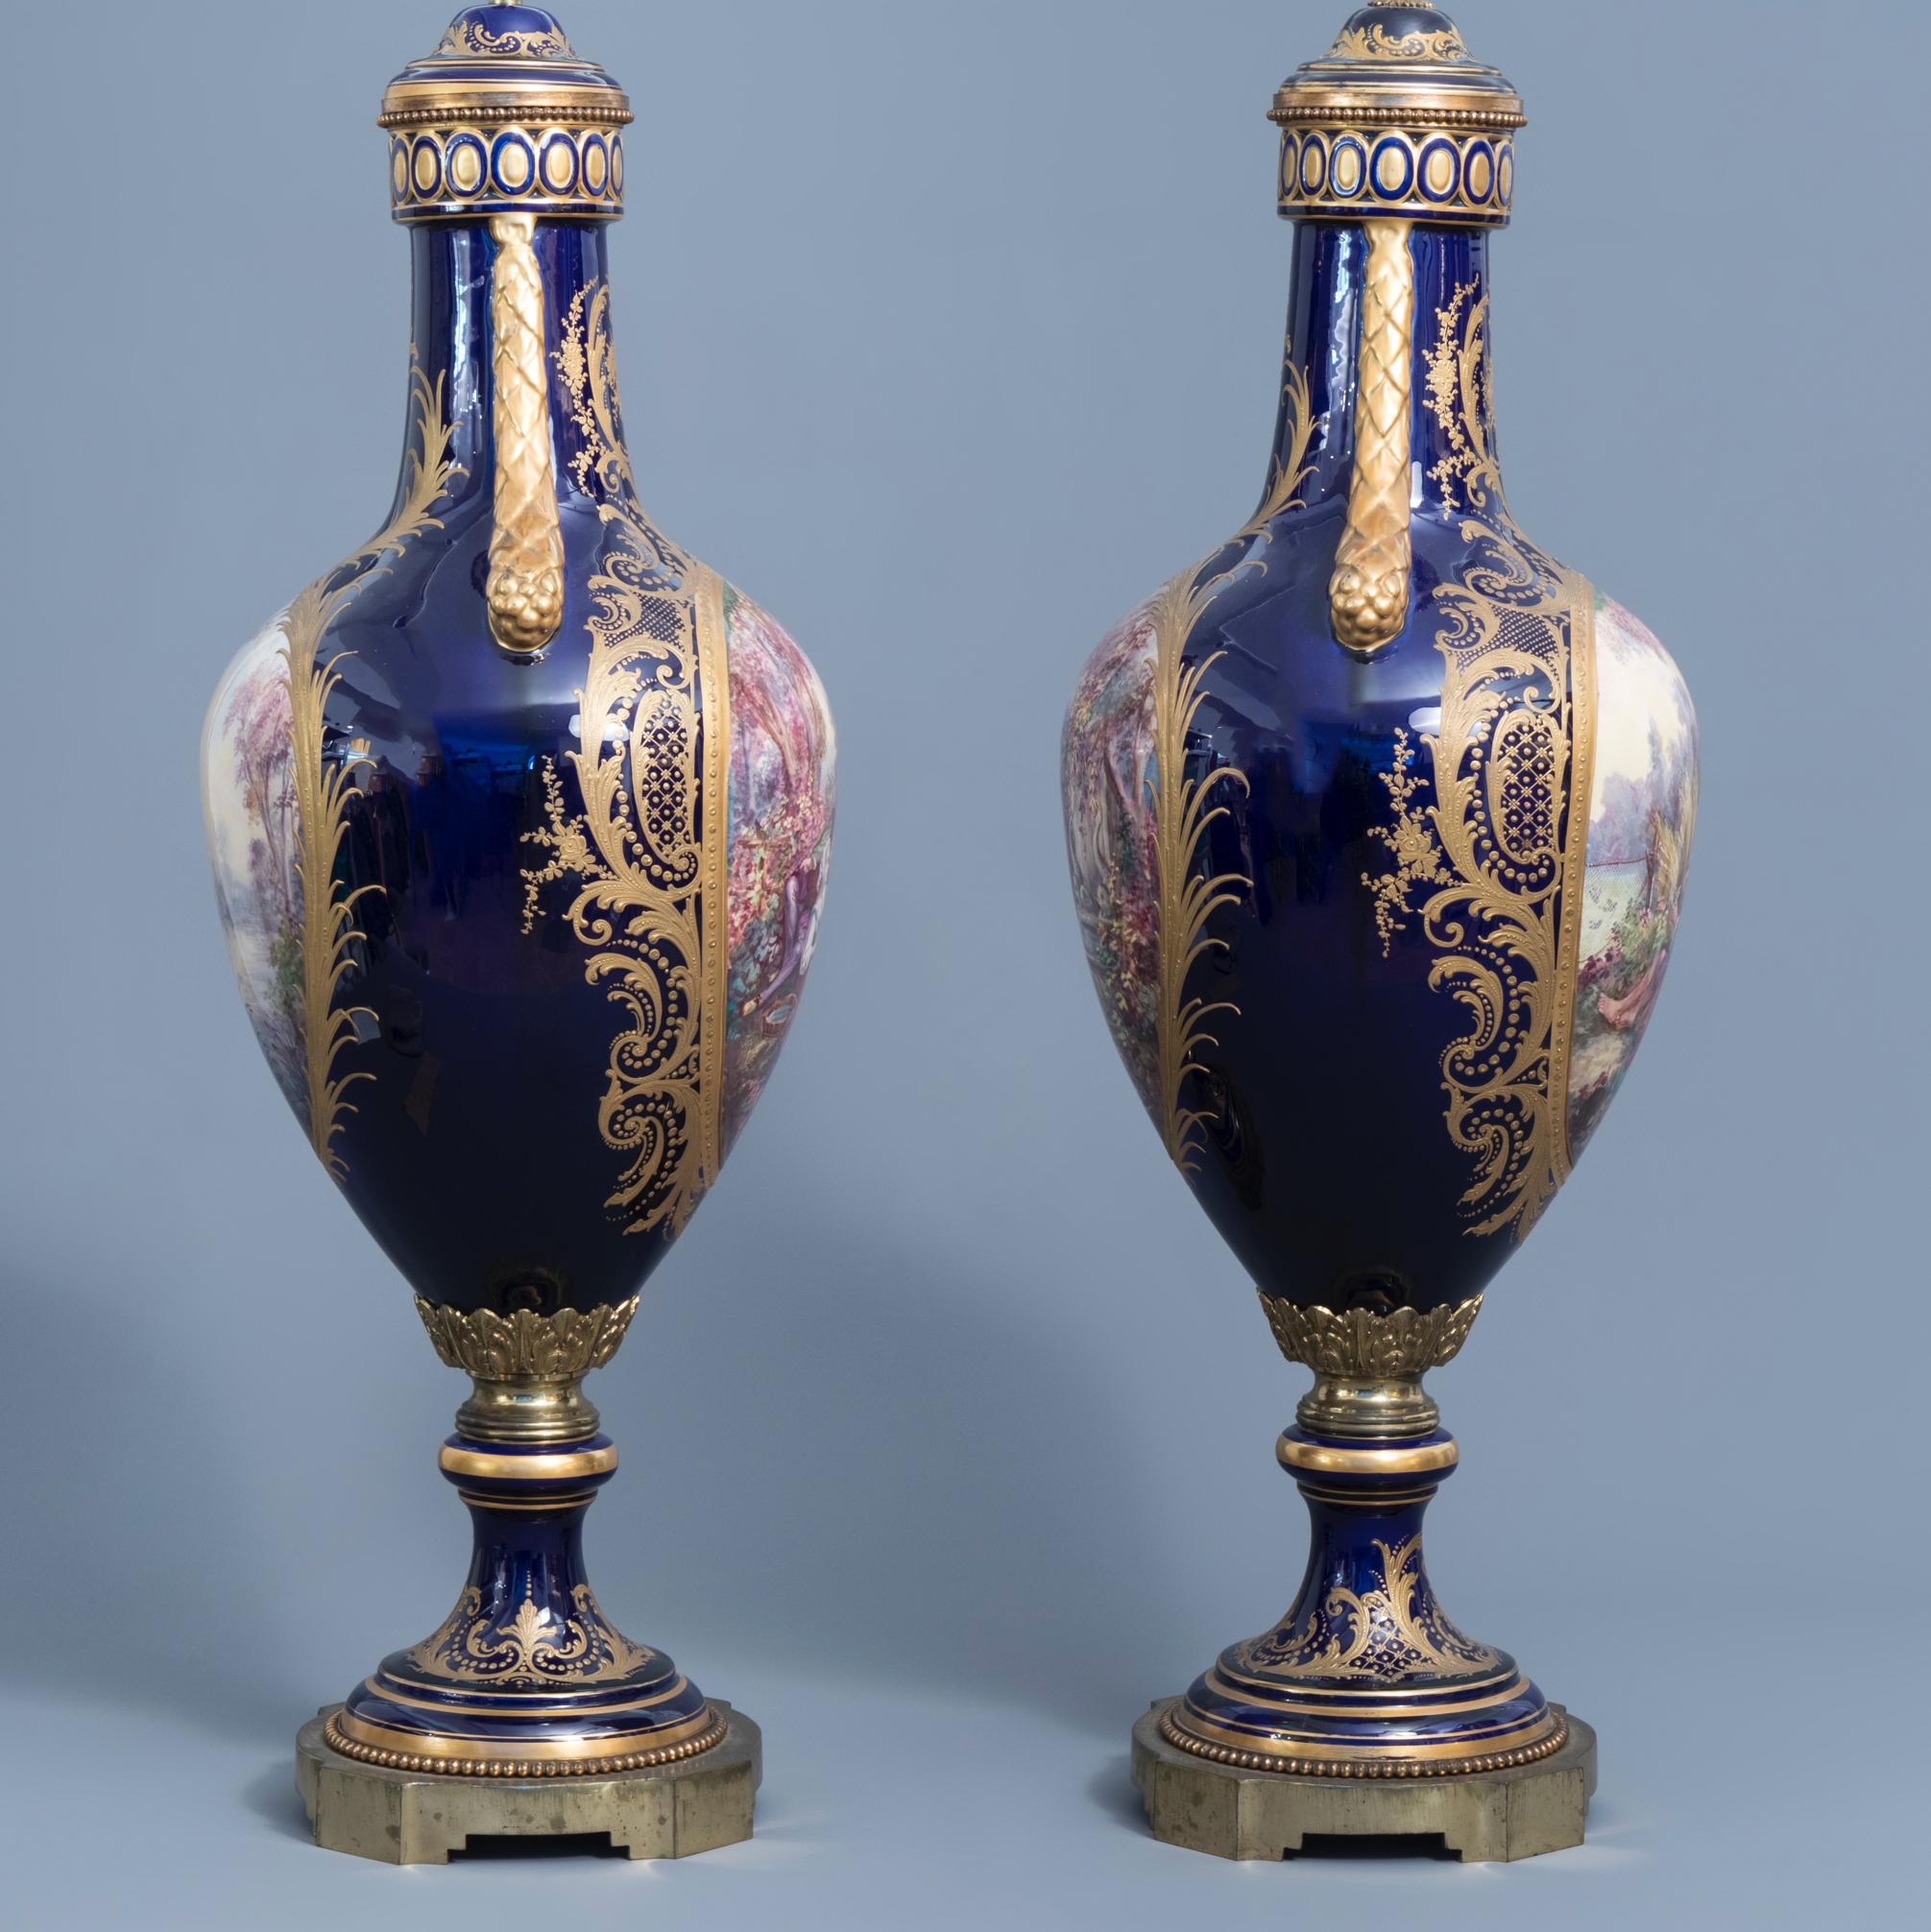 A large pair of French Sevres styles vases, the front of the vases decorated with gallant scenes while the reverse decorated with landscapes, covers stamped with a Sevres marks, The gallant scenes signed 'J. Pascot.